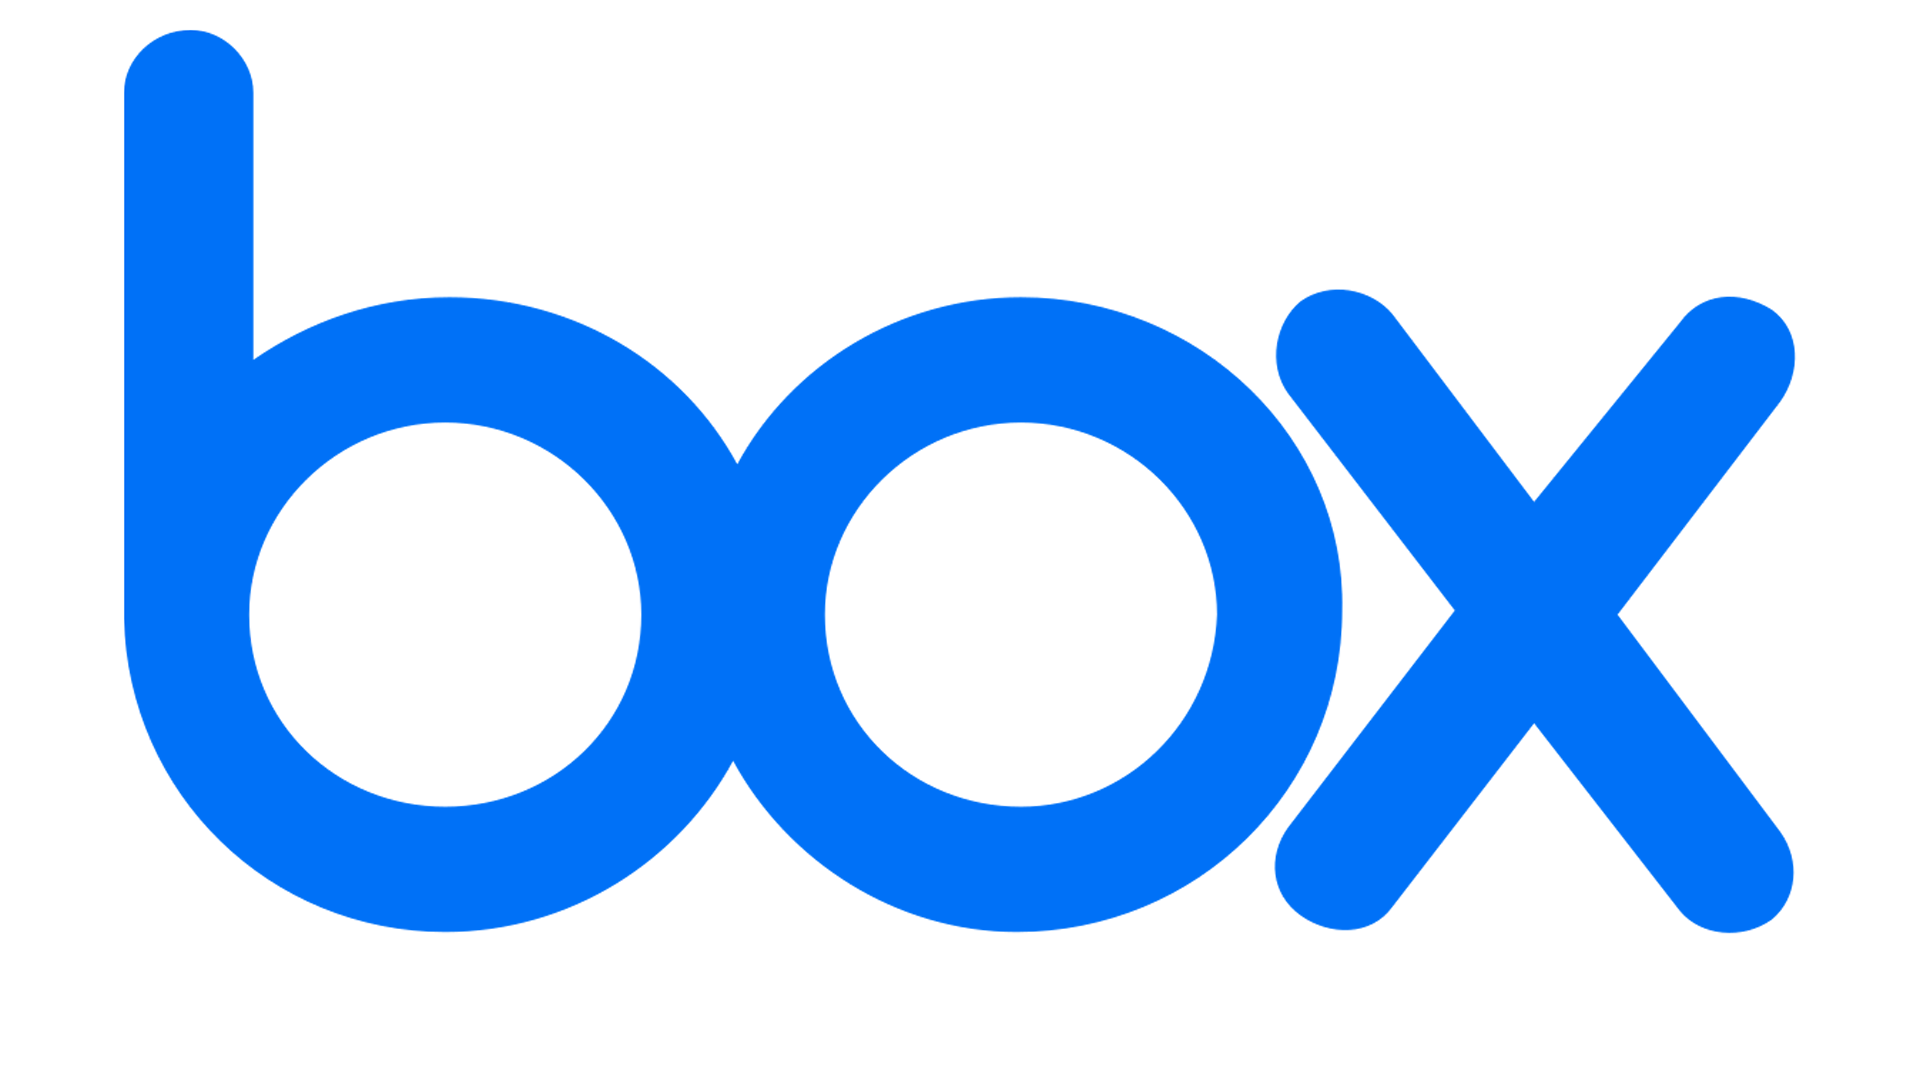 Box - Good for businesses